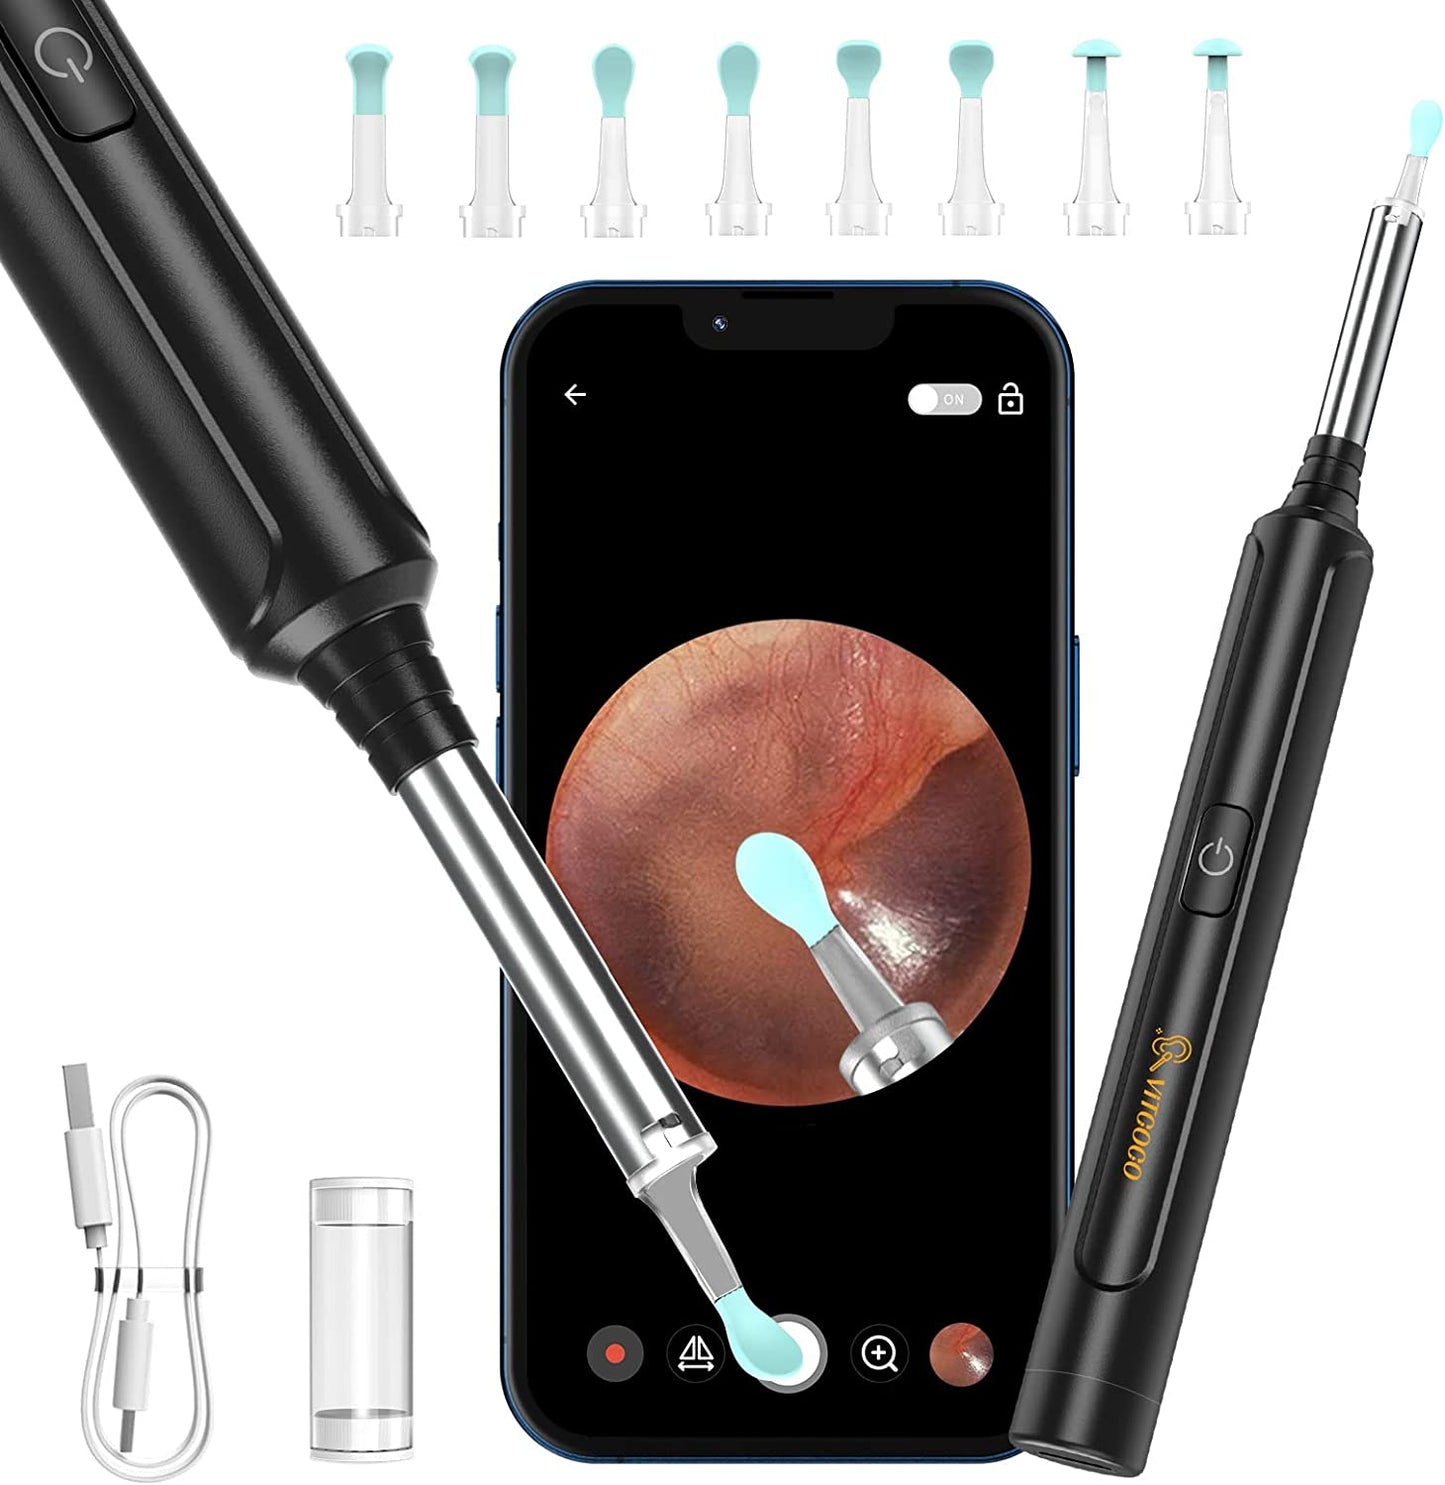 Ear Wax Removal, Ear Wax Removal Tool with 1296P HD Camera and 6